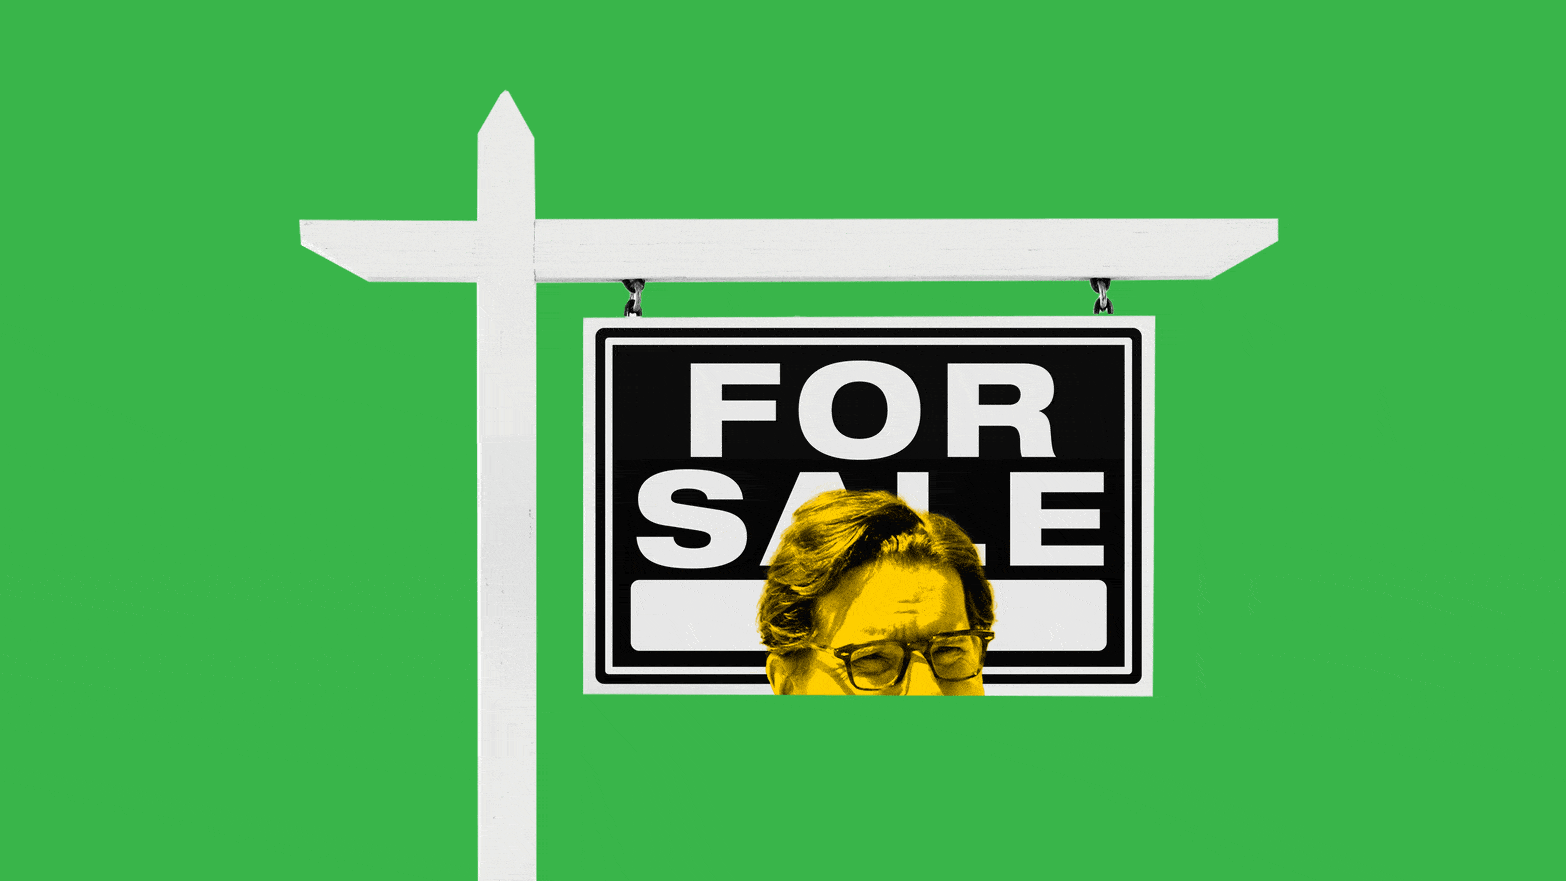 A gif of Dean Phillips poking his head in and out from a for sale sign on a green background